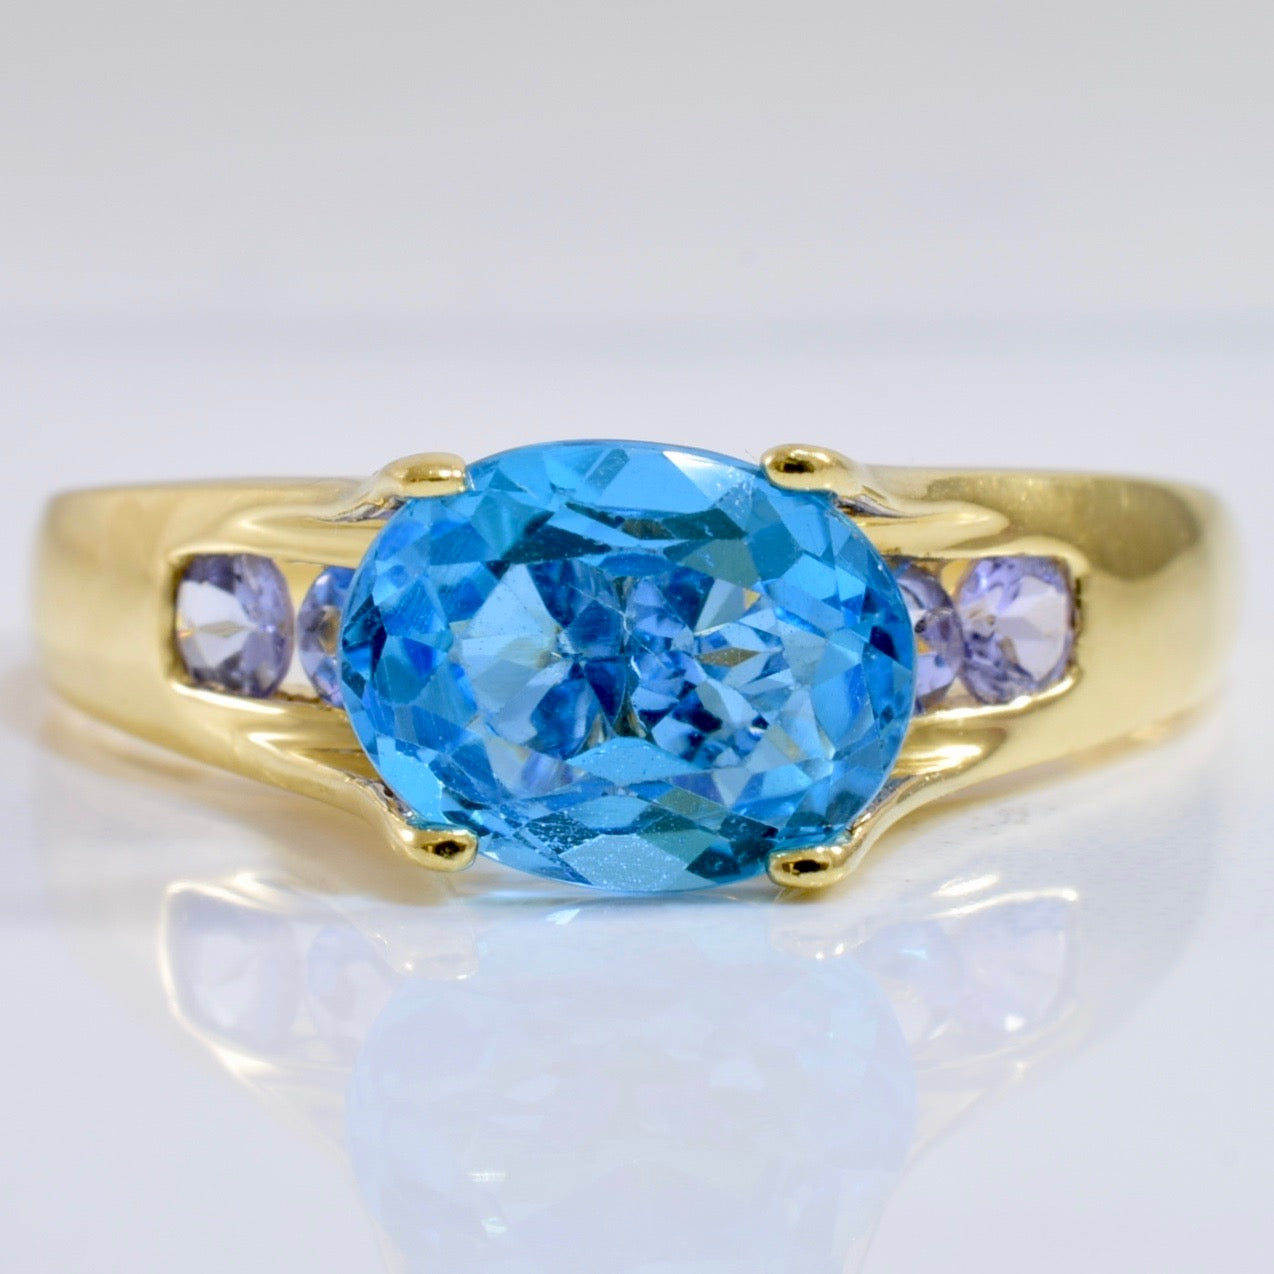 High Set Blue Topaz and Tanzanite Accent Ring | SZ 10 |